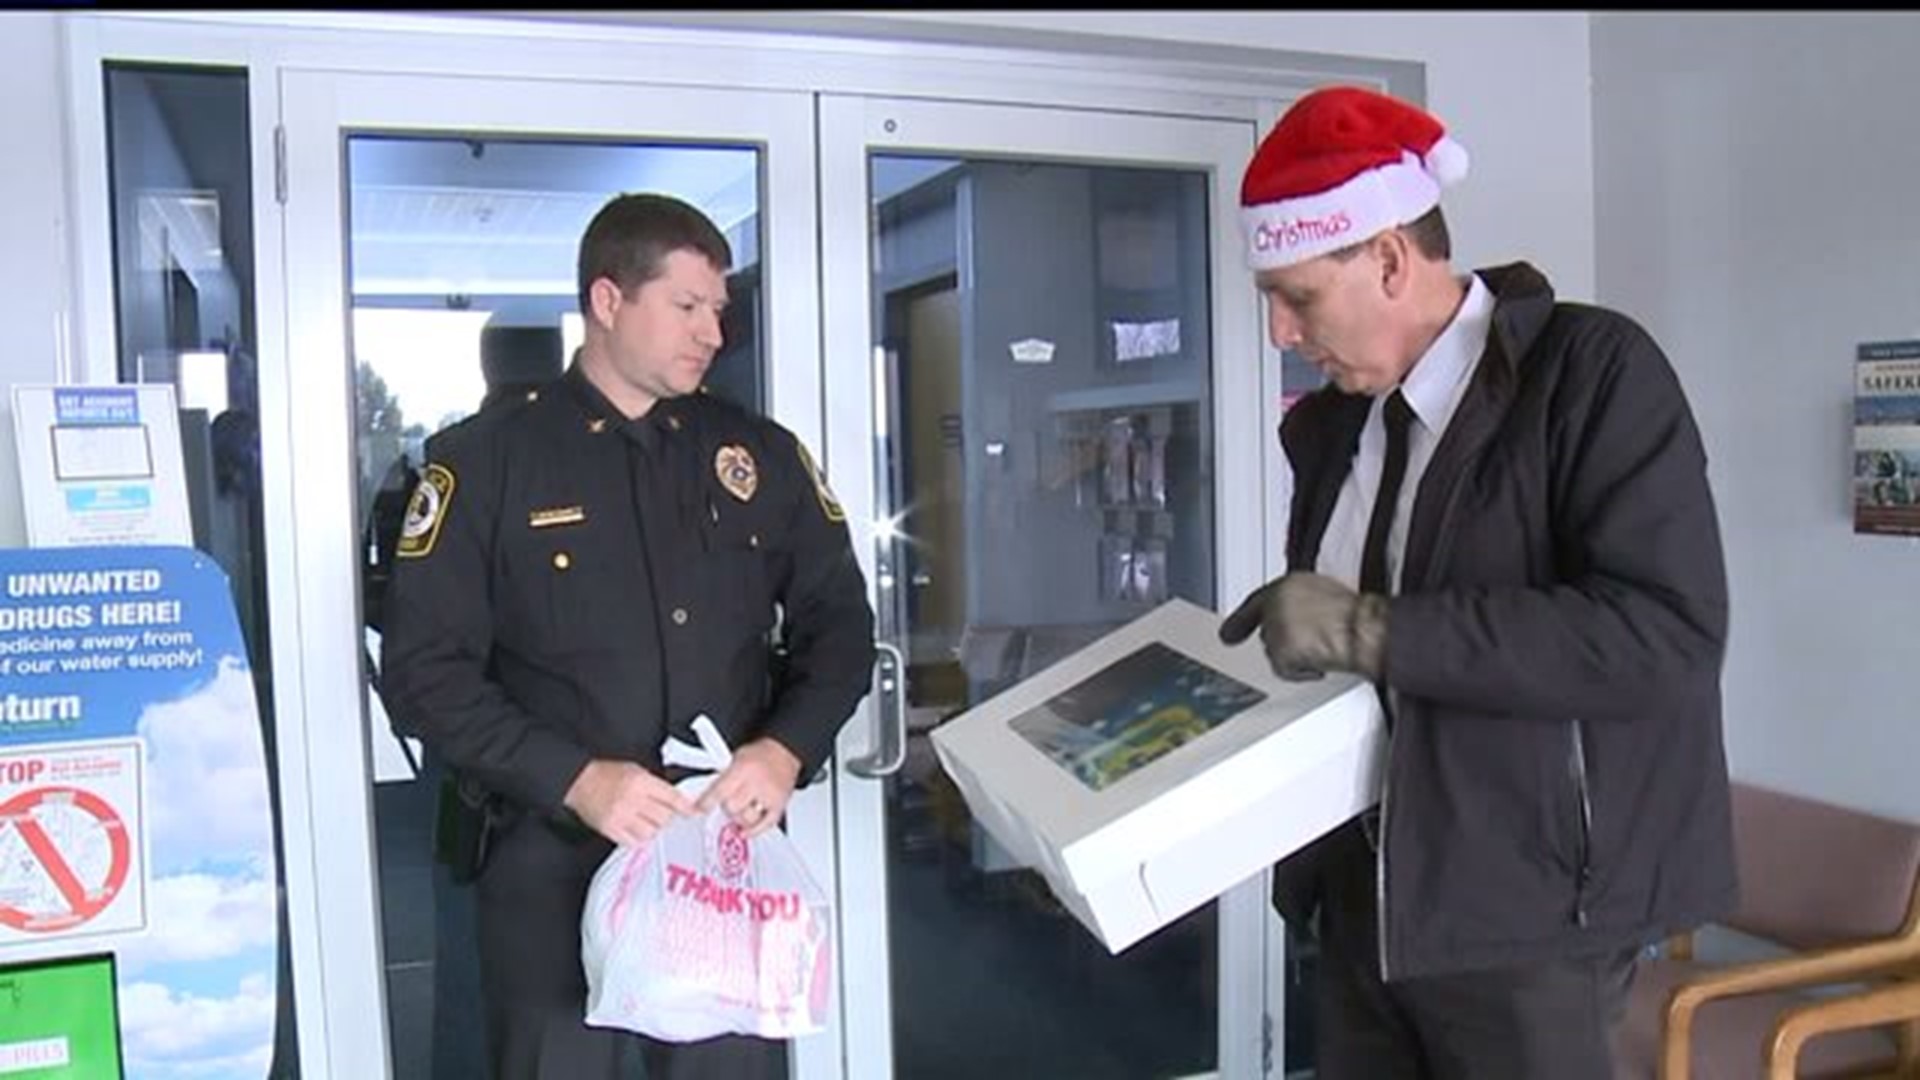 Cakes donated to local police